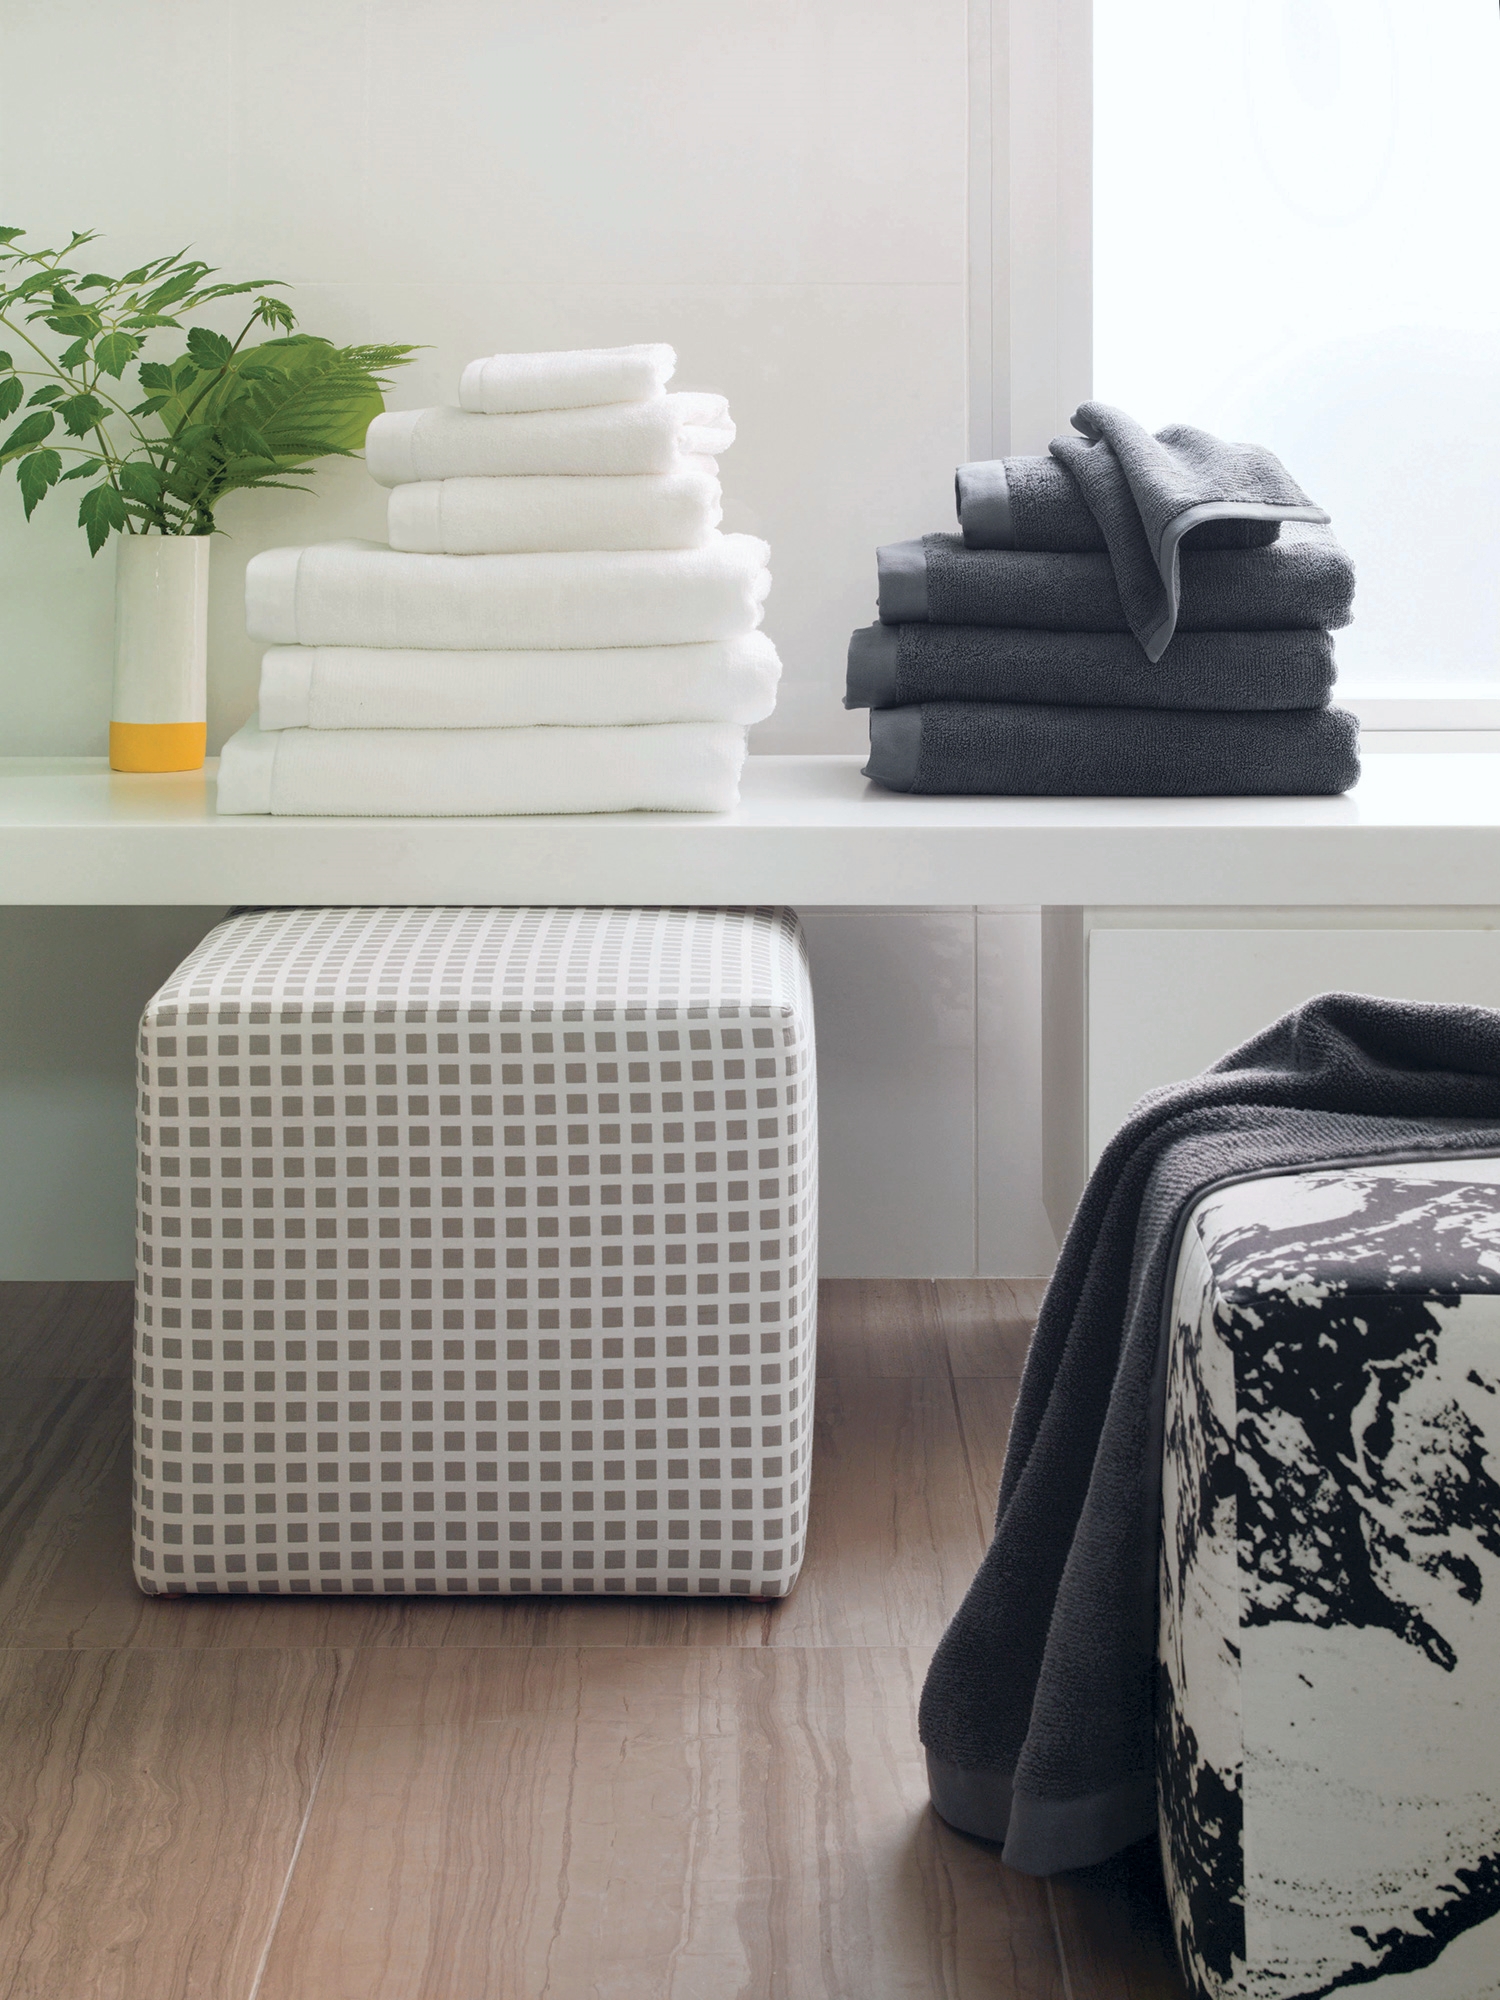 Cubes-and-towels_1130.jpg